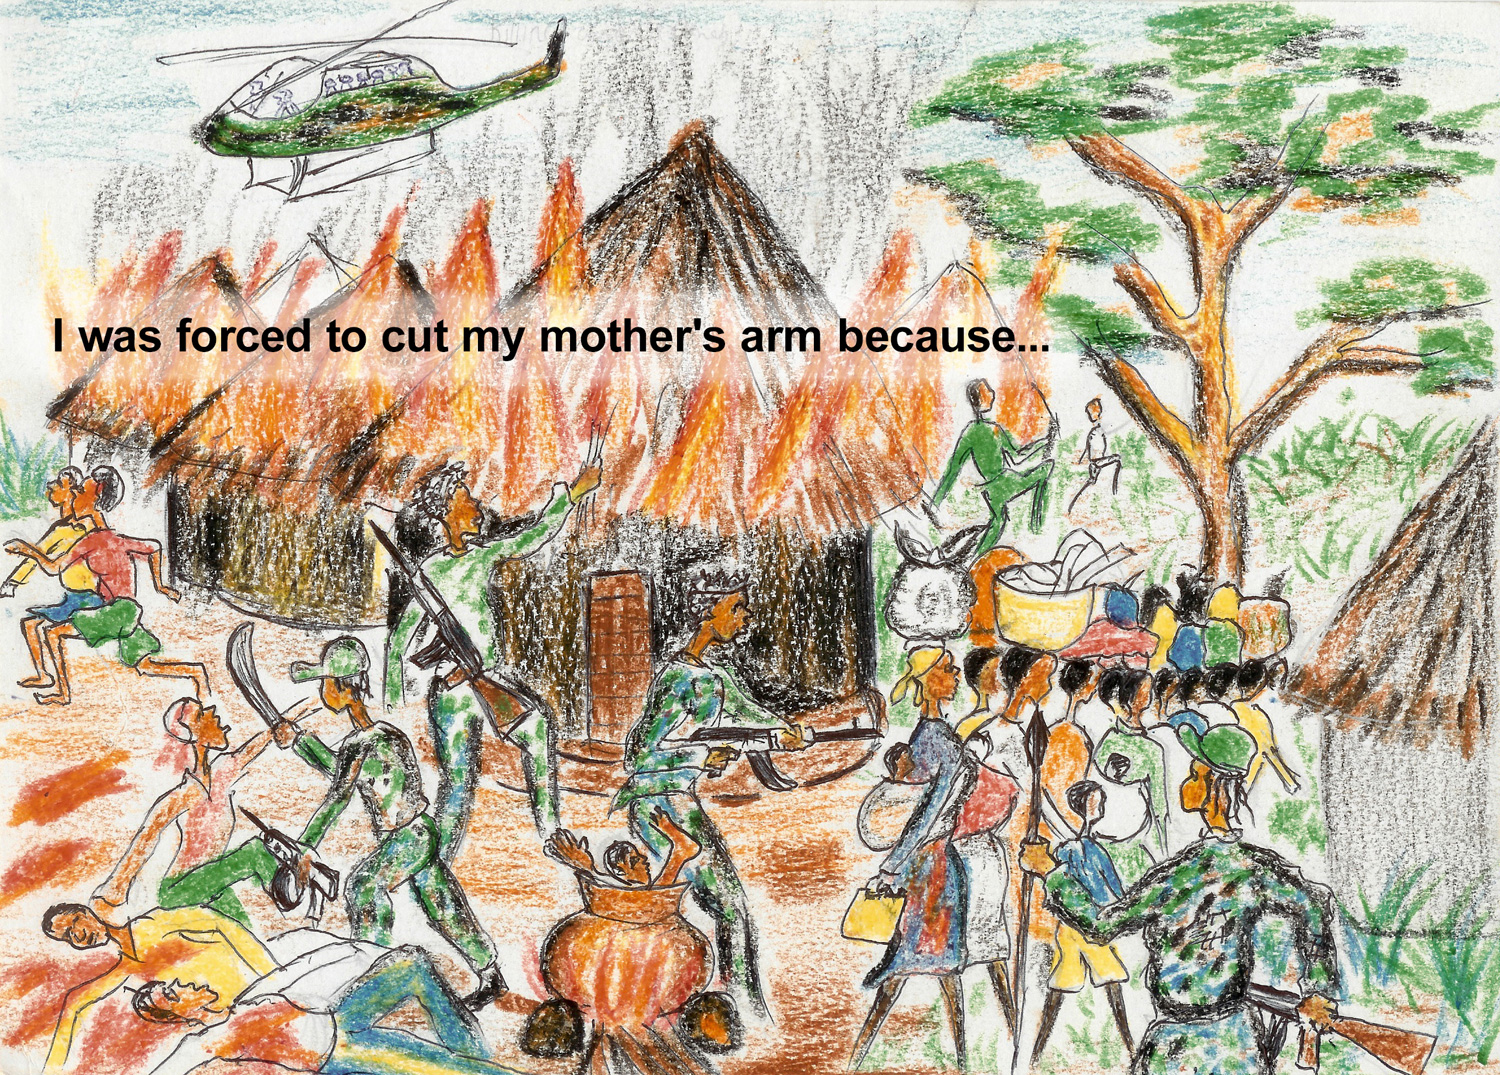 I cut the arm of my mother because...